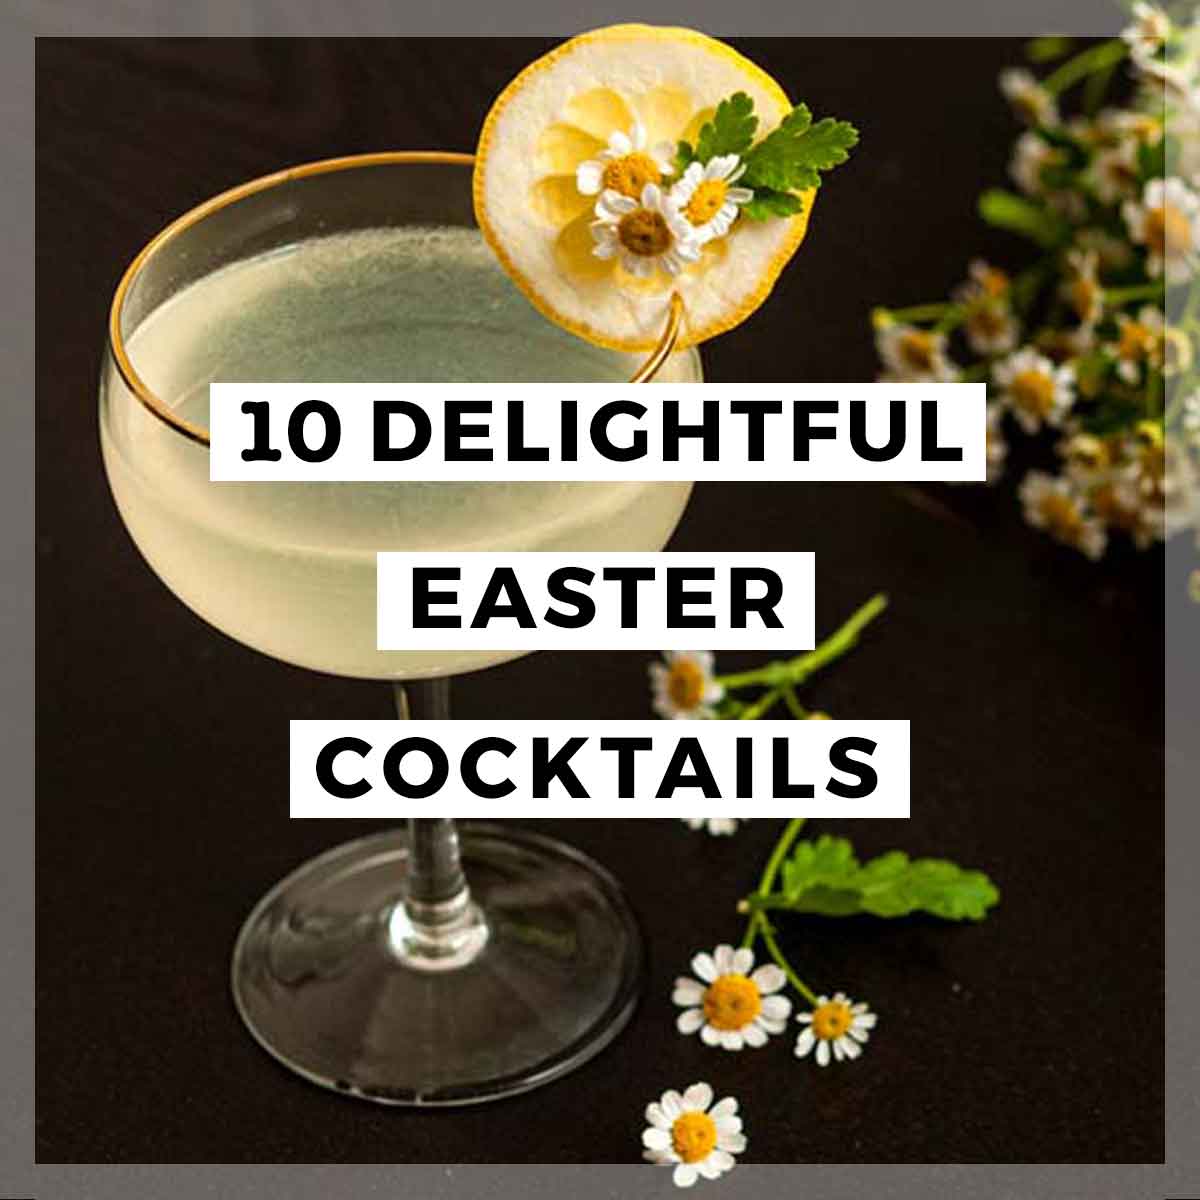 A cocktail with a floral lemon garnish behind a title that says "10 Delightful Easter Cocktails."